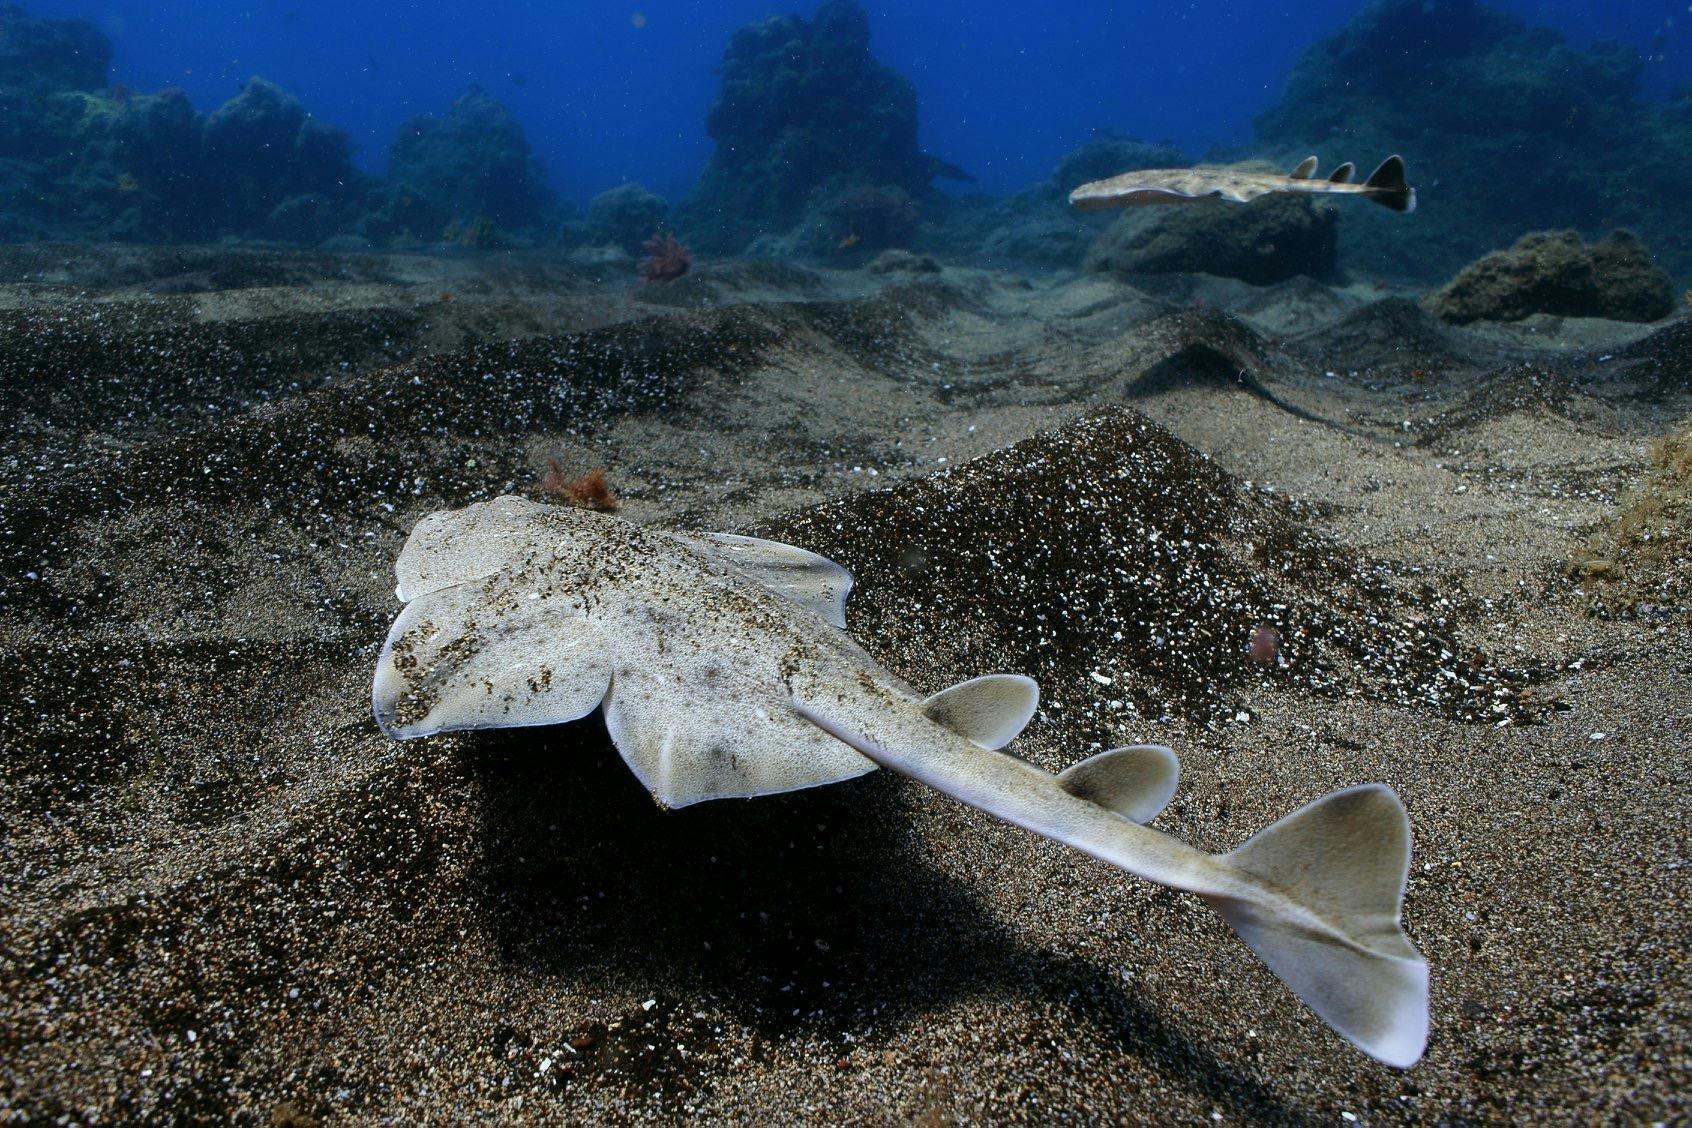 A light in the darkness – how collaborative science is helping save the Angelshark in the Canary Islands